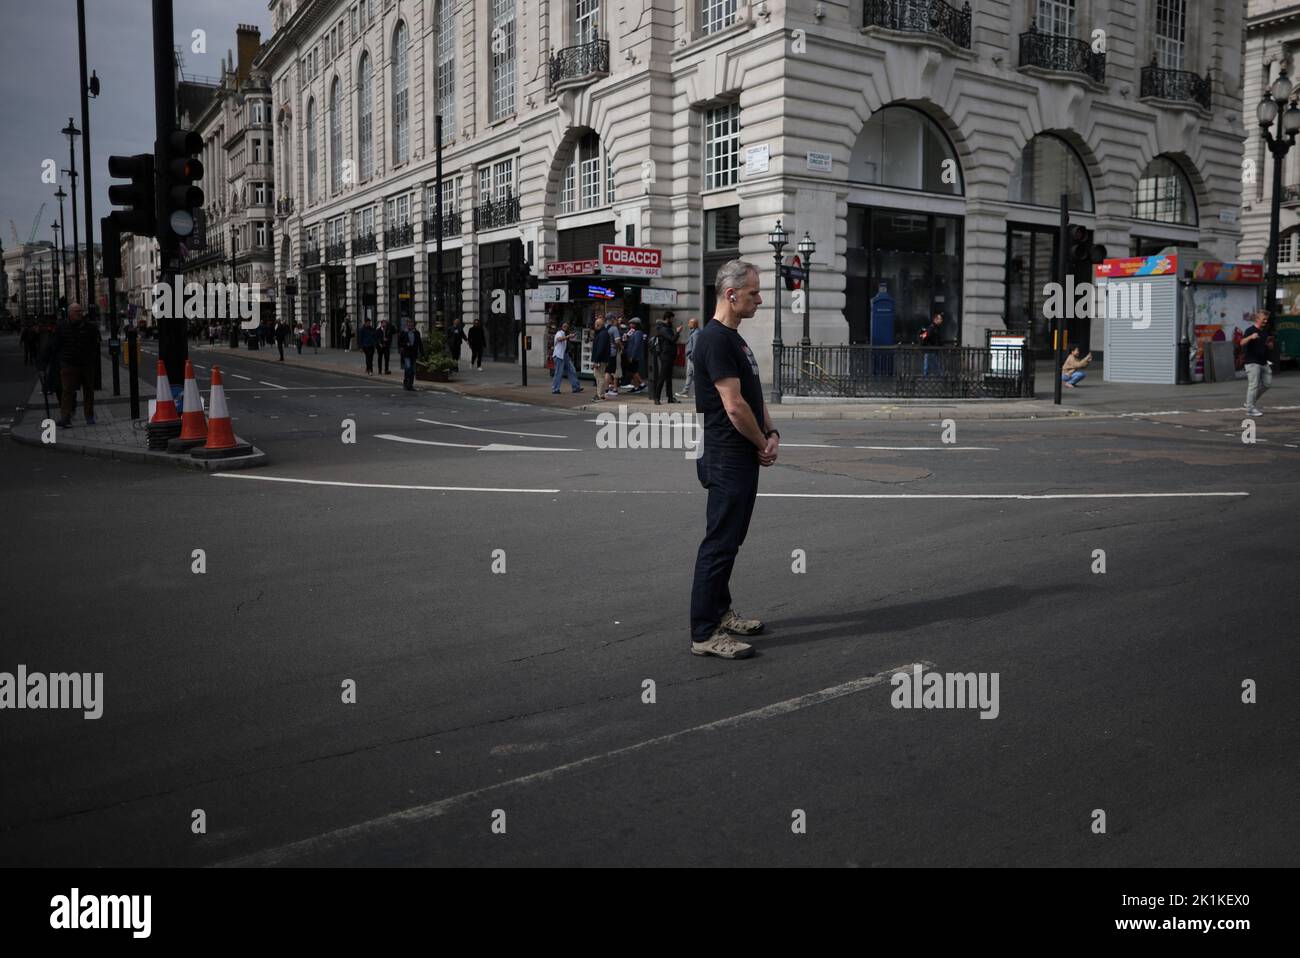 A man stands during the moment of silence on the day of the state funeral and burial of Britain's Queen Elizabeth, in London, Britain, September 19, 2022. REUTERS/Carlos Barria Stock Photo